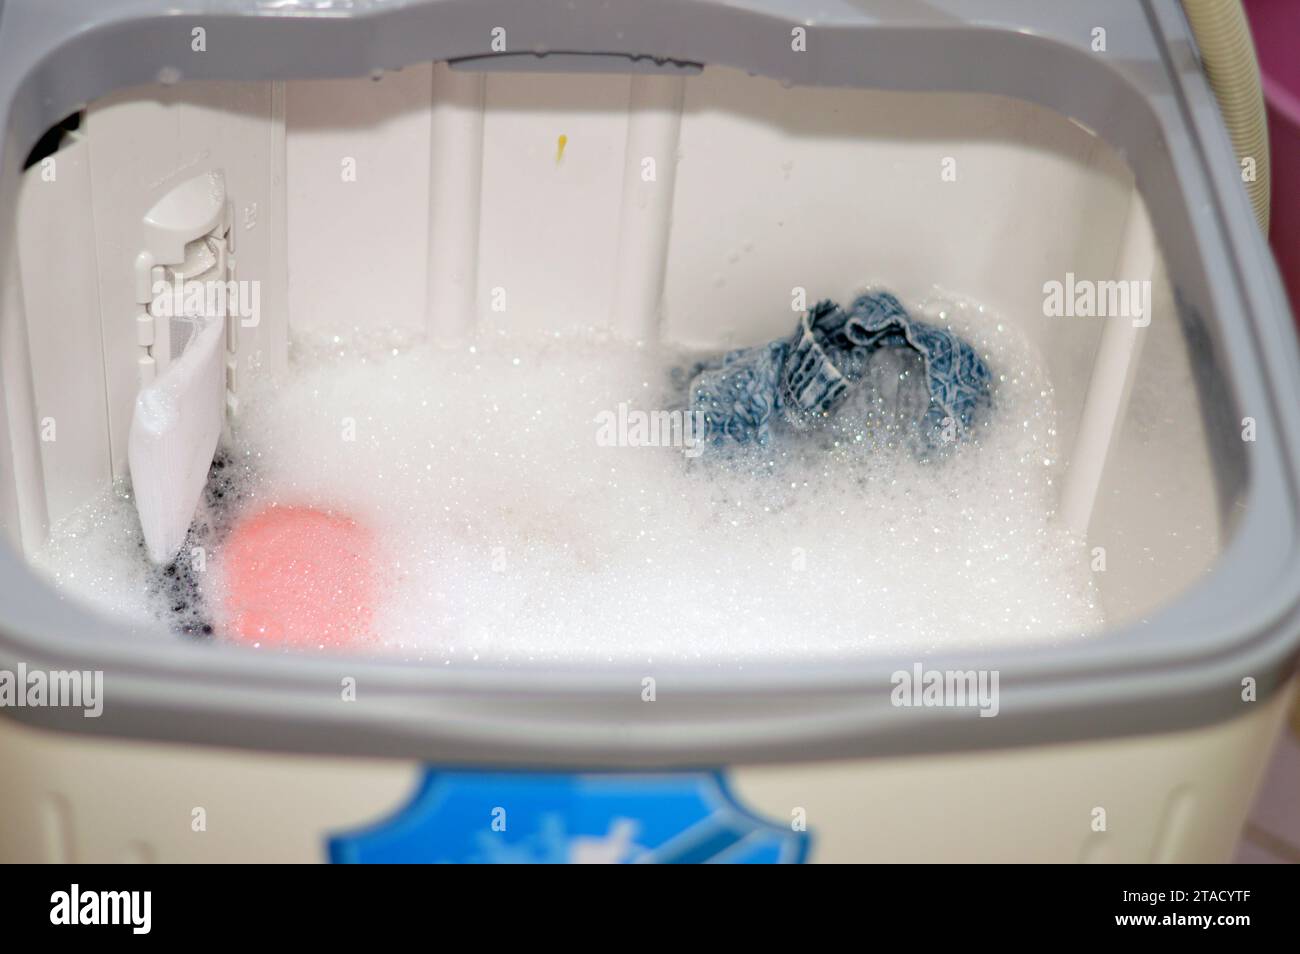 manual top load washing machine, laundry clothes washer, a home appliance used to wash laundry, user adds laundry detergent, which is sold in liquid, Stock Photo